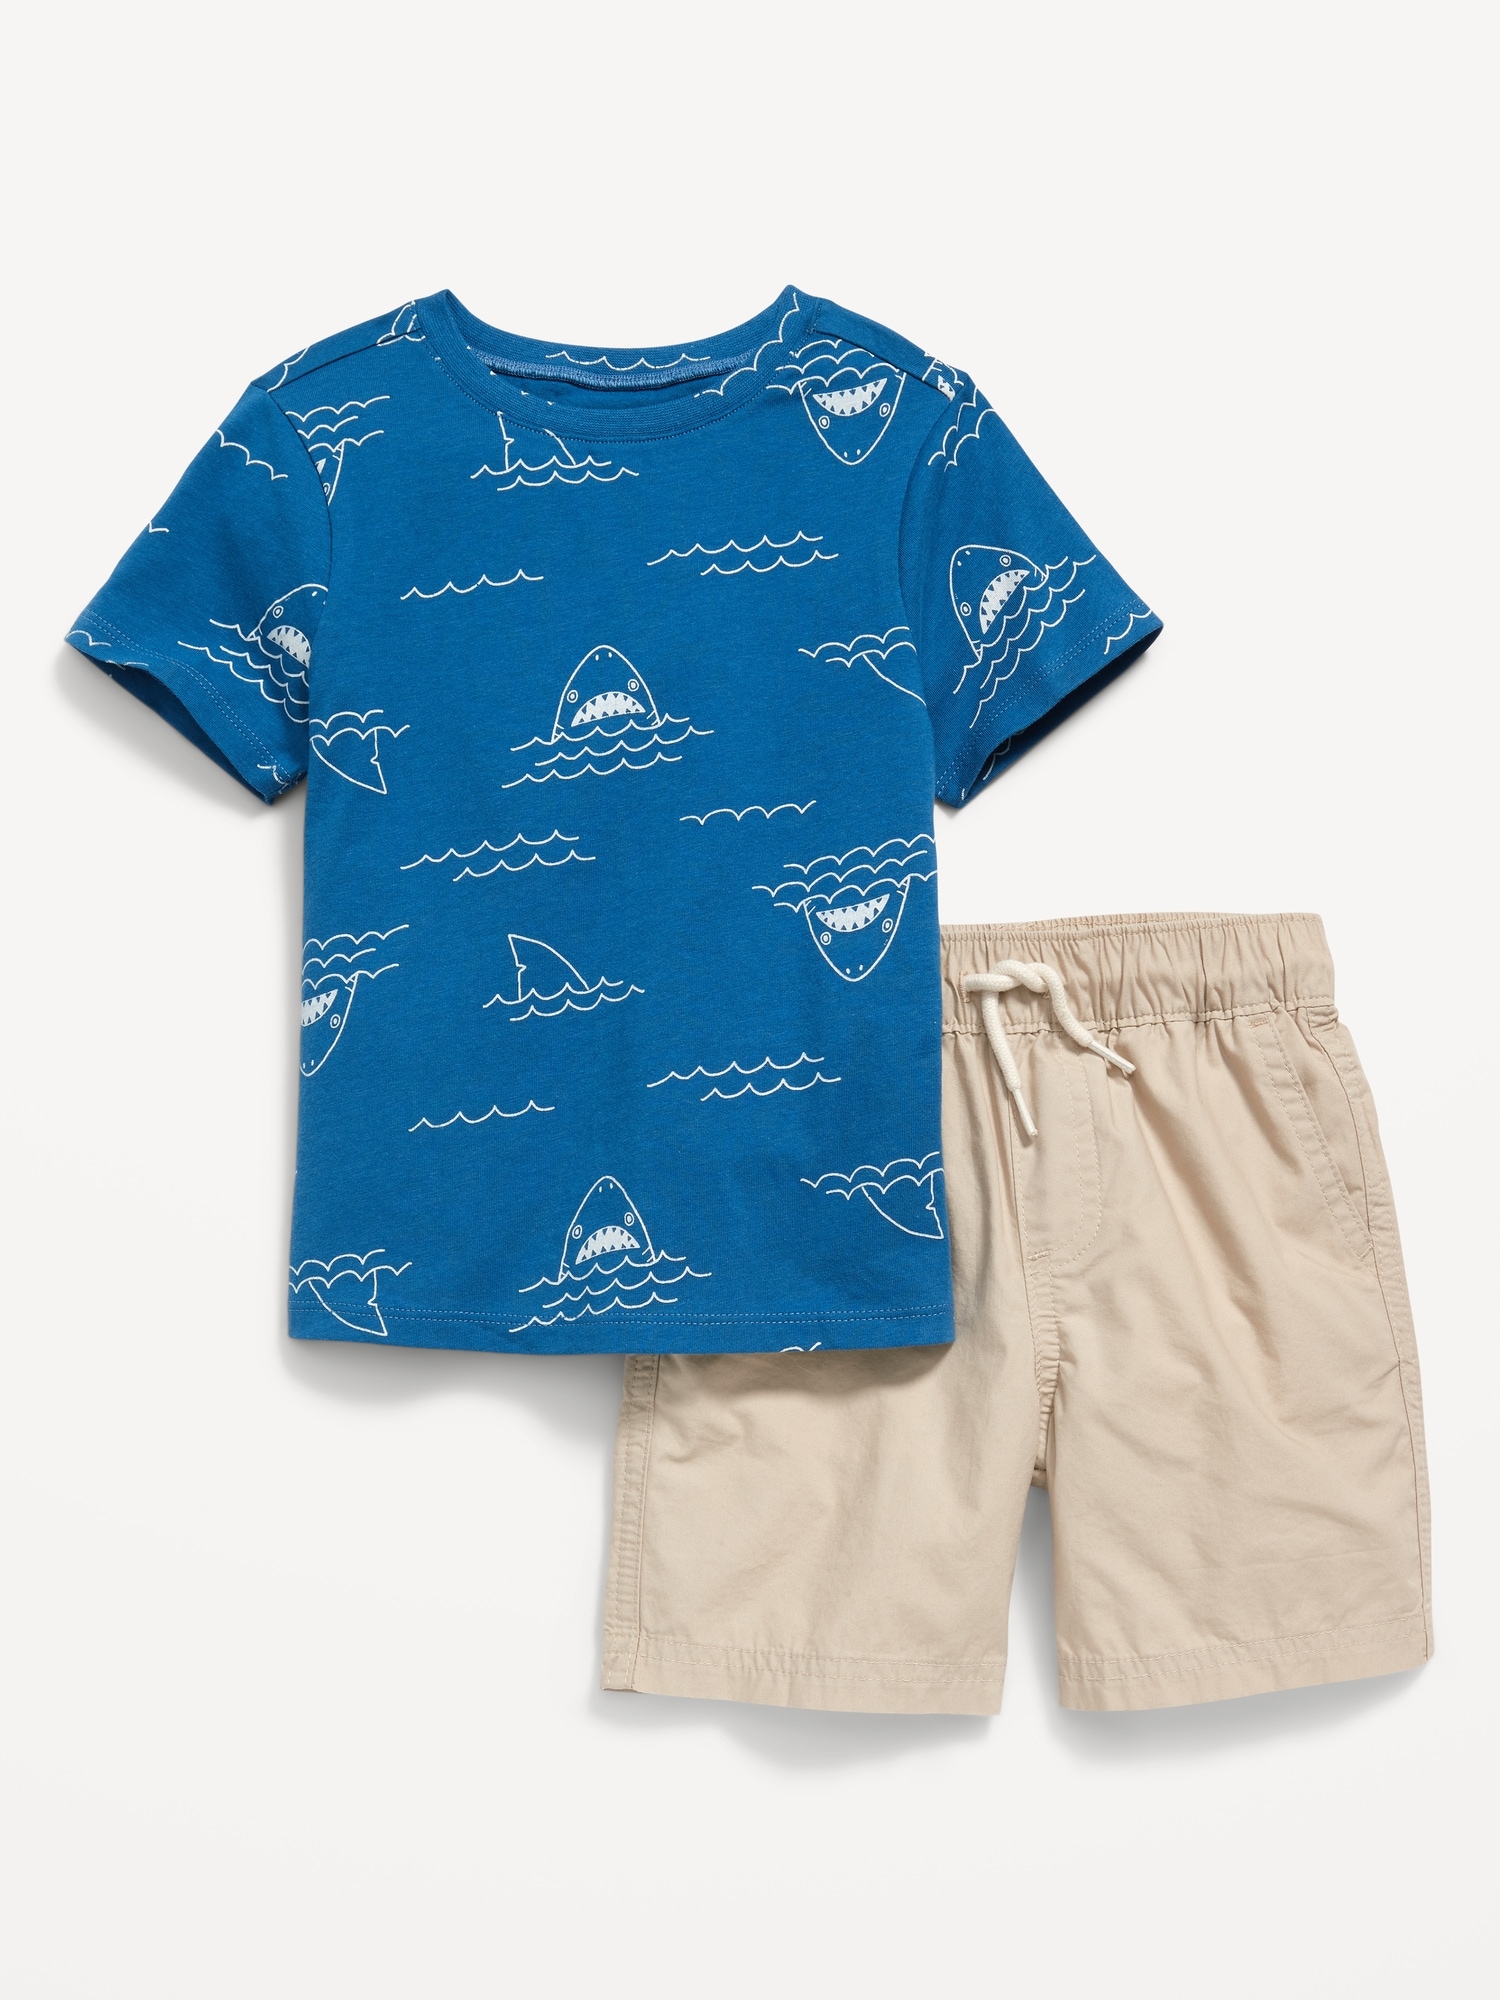 BSSO0284 Baby Boy Summer Shorts Set Fishing Toddler Boy Clothes 2T